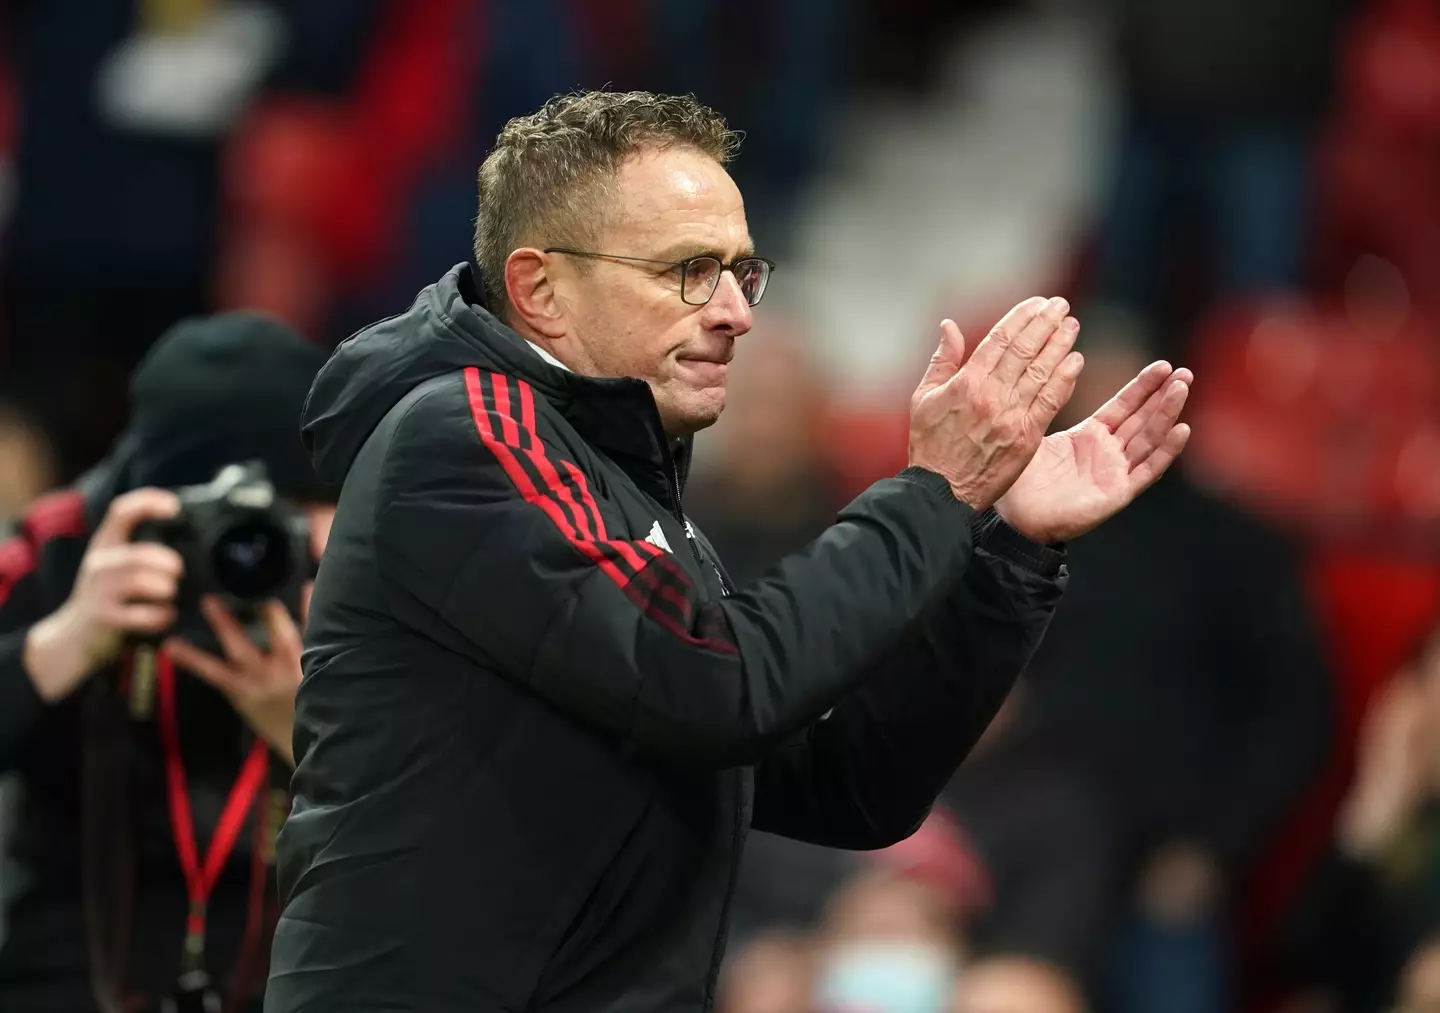 Manchester United interim manager Ralf Rangnick is also said to be an admirer (Image: PA)